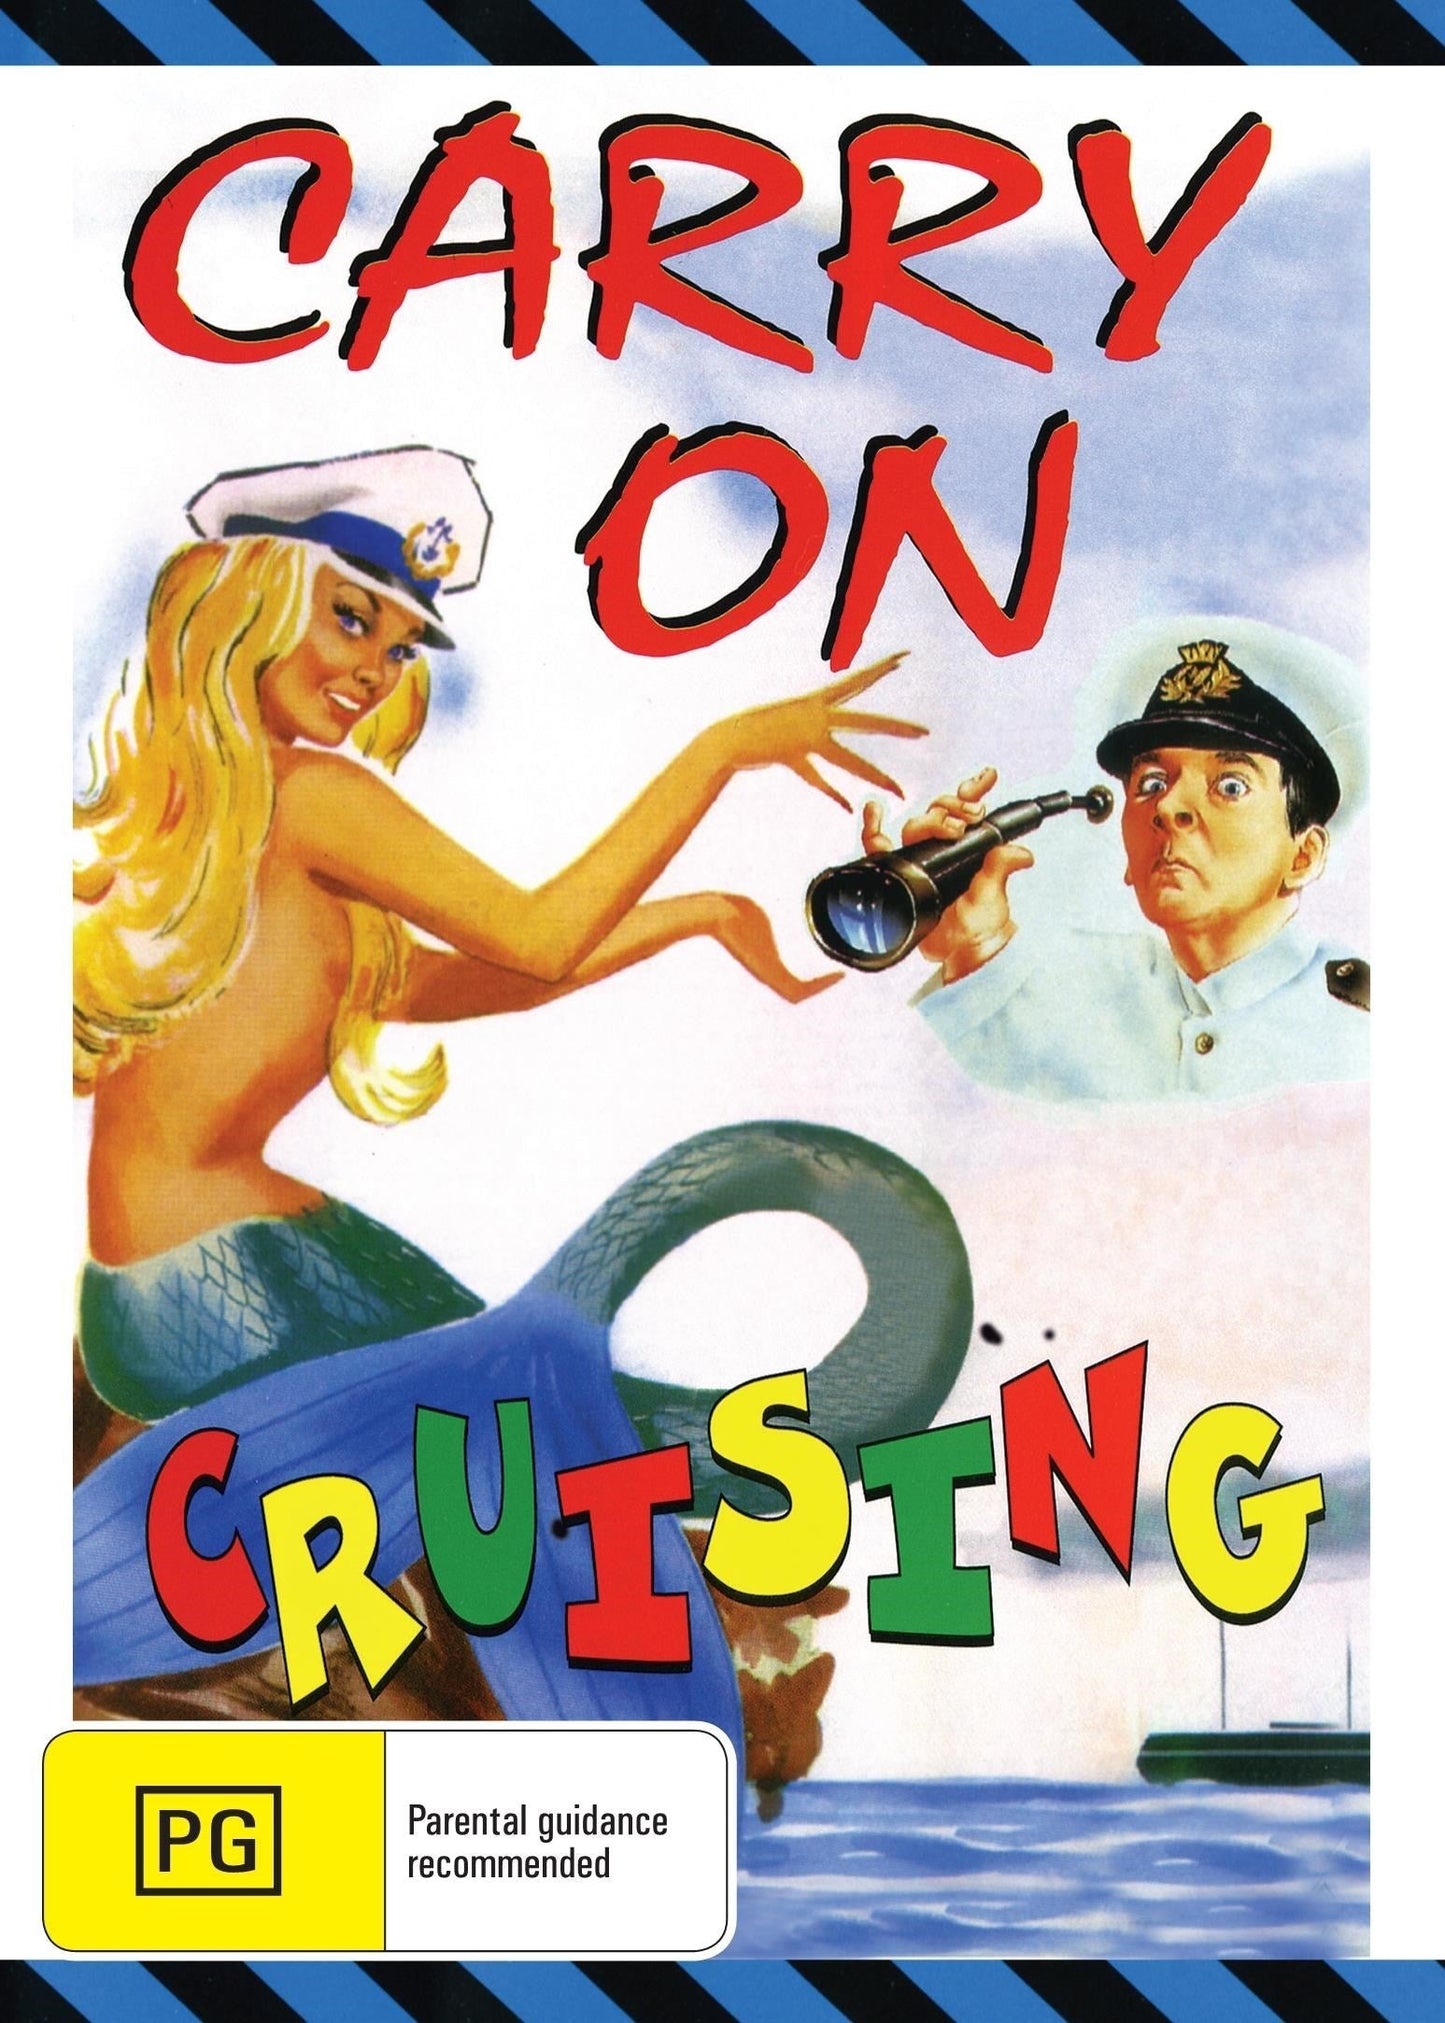 Carry On Cruising rareandcollectibledvds